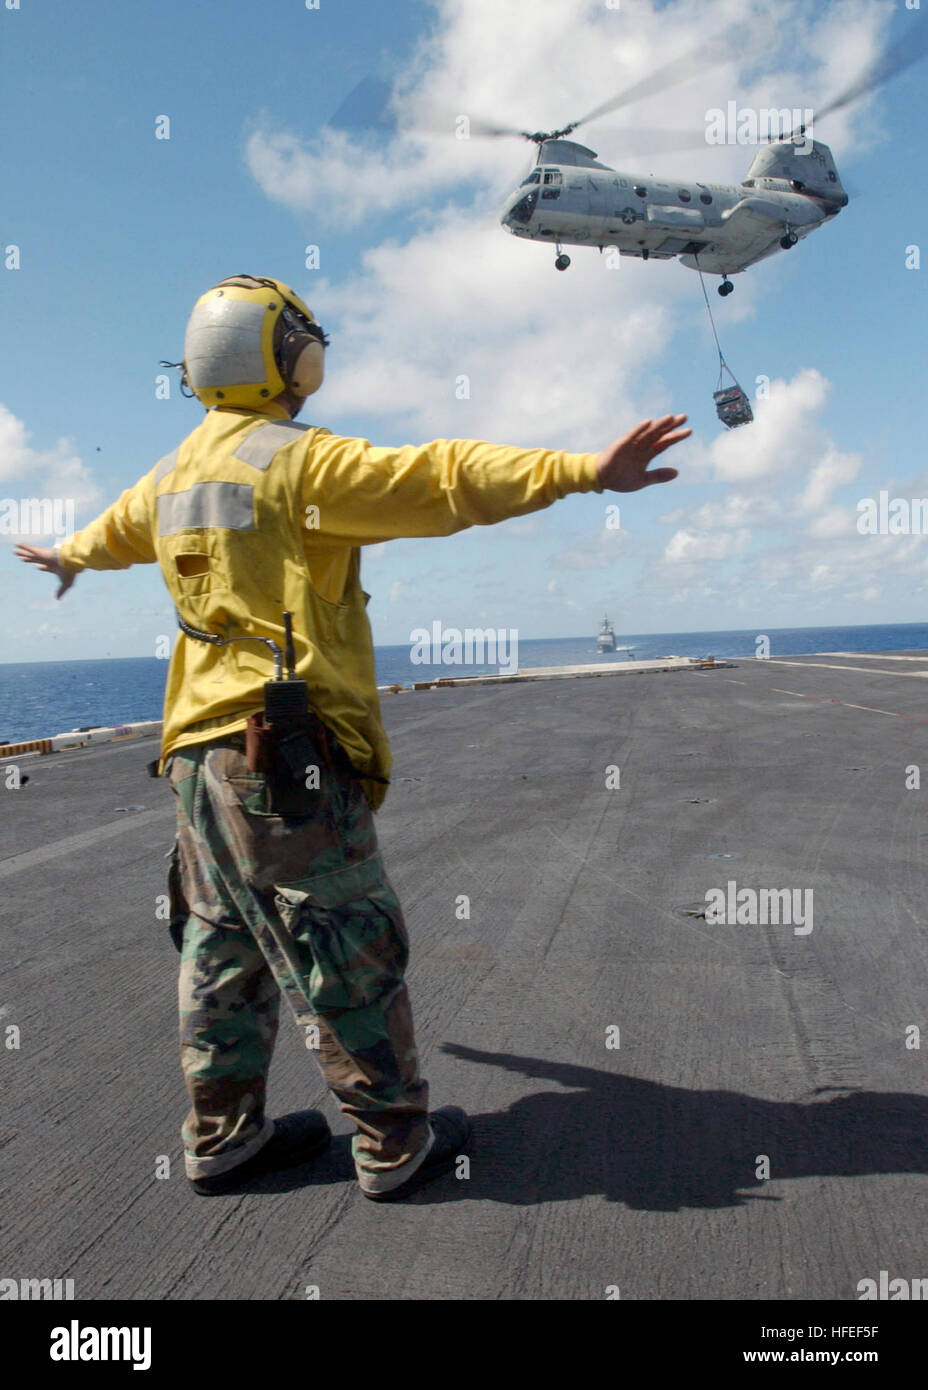 030122-N-6895M-508 At sea aboard USS Theodore Roosevelt (CVN 71) Jan. 22, 2003 -- An Aviation Boatswain's Mate directs a CH-46 ÒSea KnightÓ helicopter as it prepares to place ordnance on the shipÕs flight deck during a Vertical Replenishment at Sea (VERTREP) with the Military Sealift Command ship USNS Arctic (T-AOE 8).  Roosevelt is conducting training exercises in the Caribbean Sea, while preparing for deployment to the central command area of responsibility.  U.S. Navy photo by PhotographerÕs Mate 2nd Class James K. McNeil.  (RELEASED) US Navy 030122-N-6895M-508 Aviation Boatswain's Mate dir Stock Photo